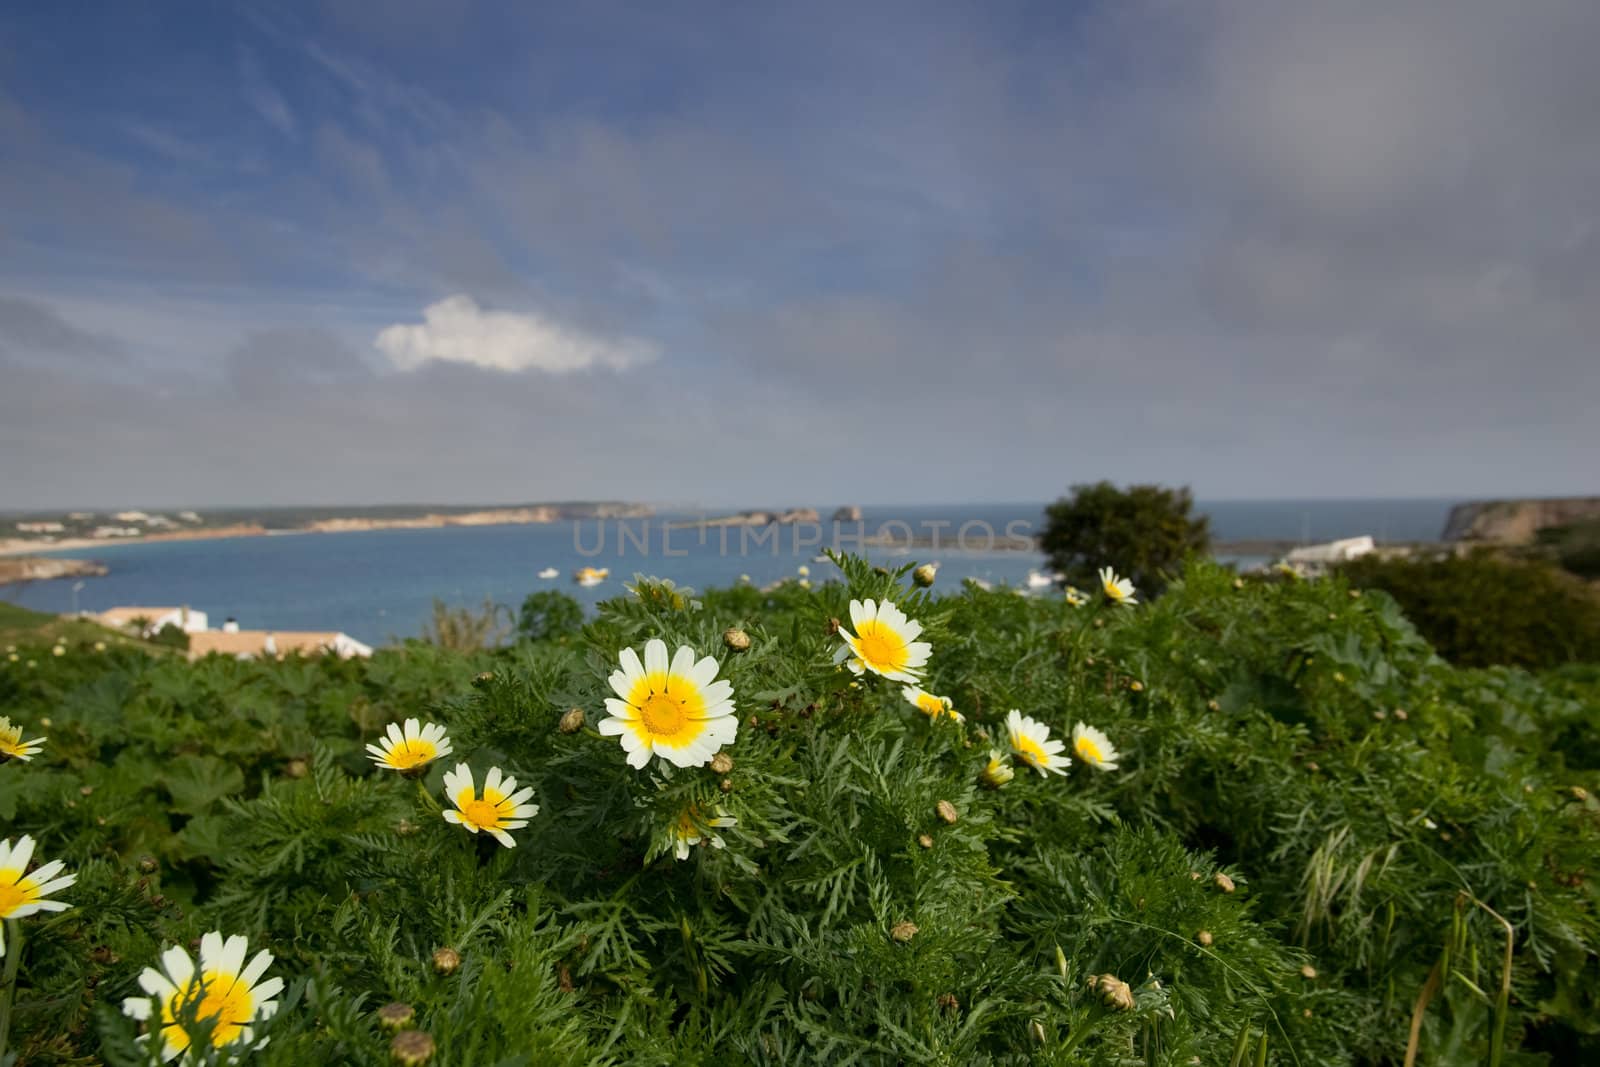 Daisies overlooking the bay at Sagres, in the Algarve, Portugal.